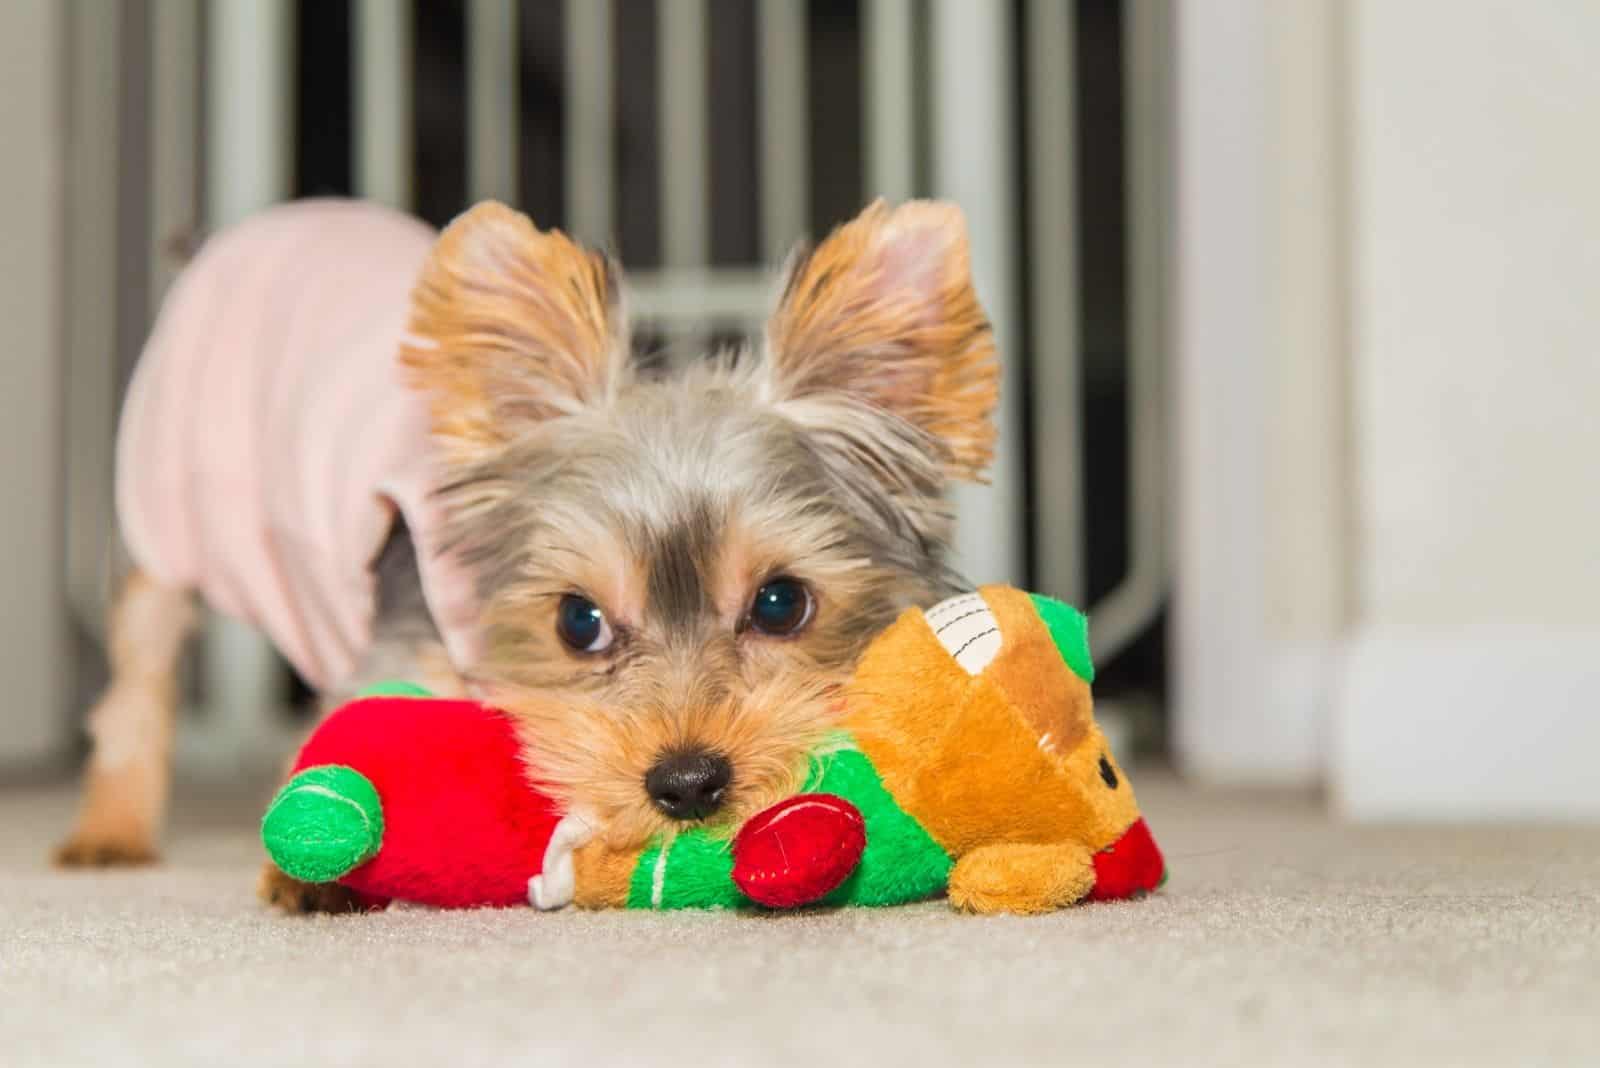 Dani the yorkie playing with her doll